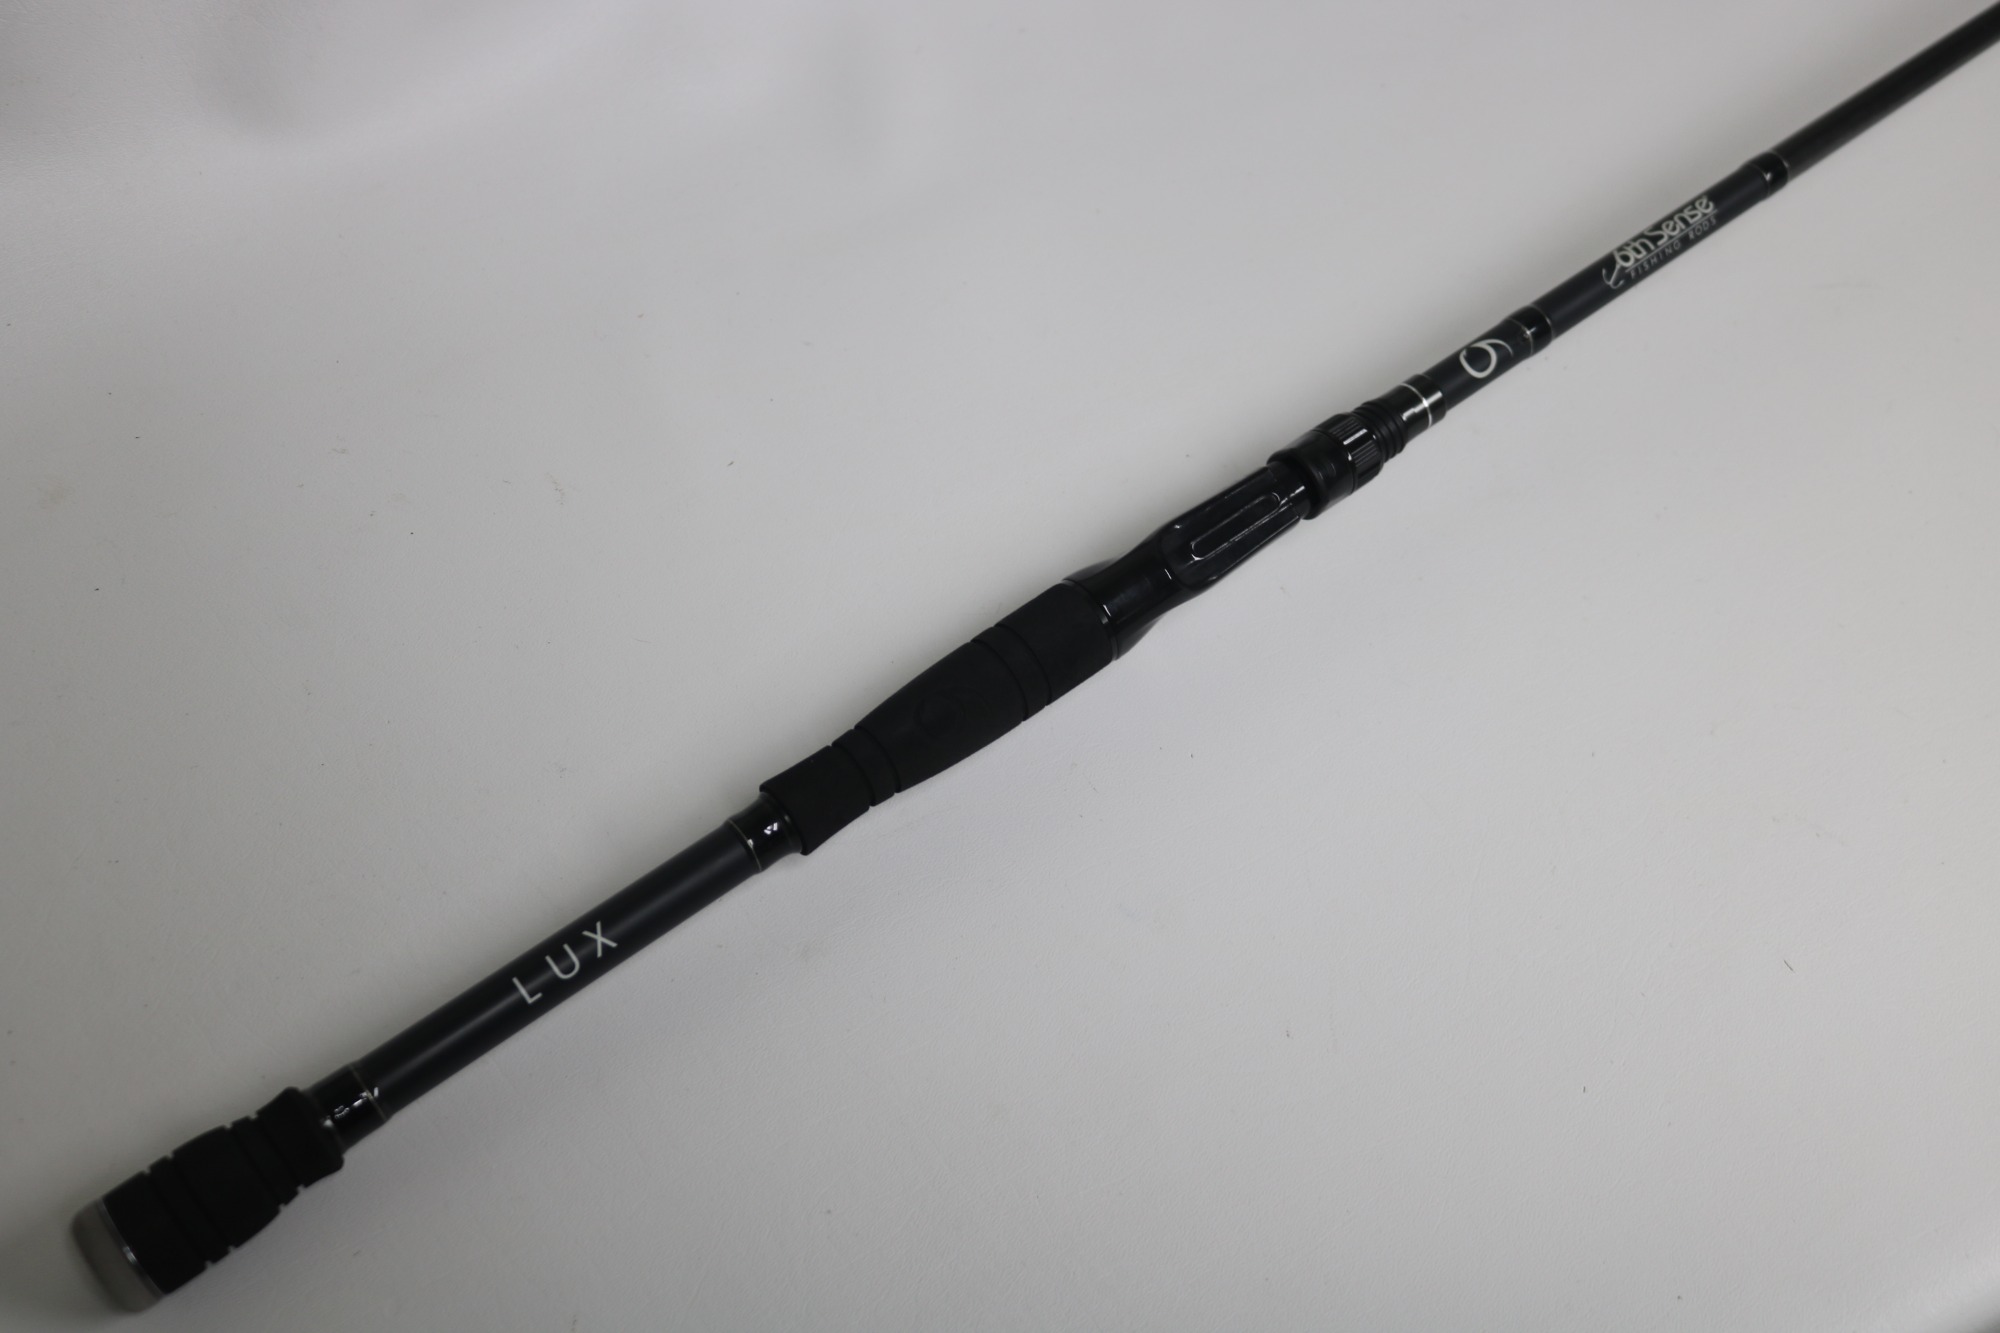 6th Sense Lux RODLUX-H75 7'5 Heavy - Used Casting Rod - Very Good  Condition - American Legacy Fishing, G Loomis Superstore